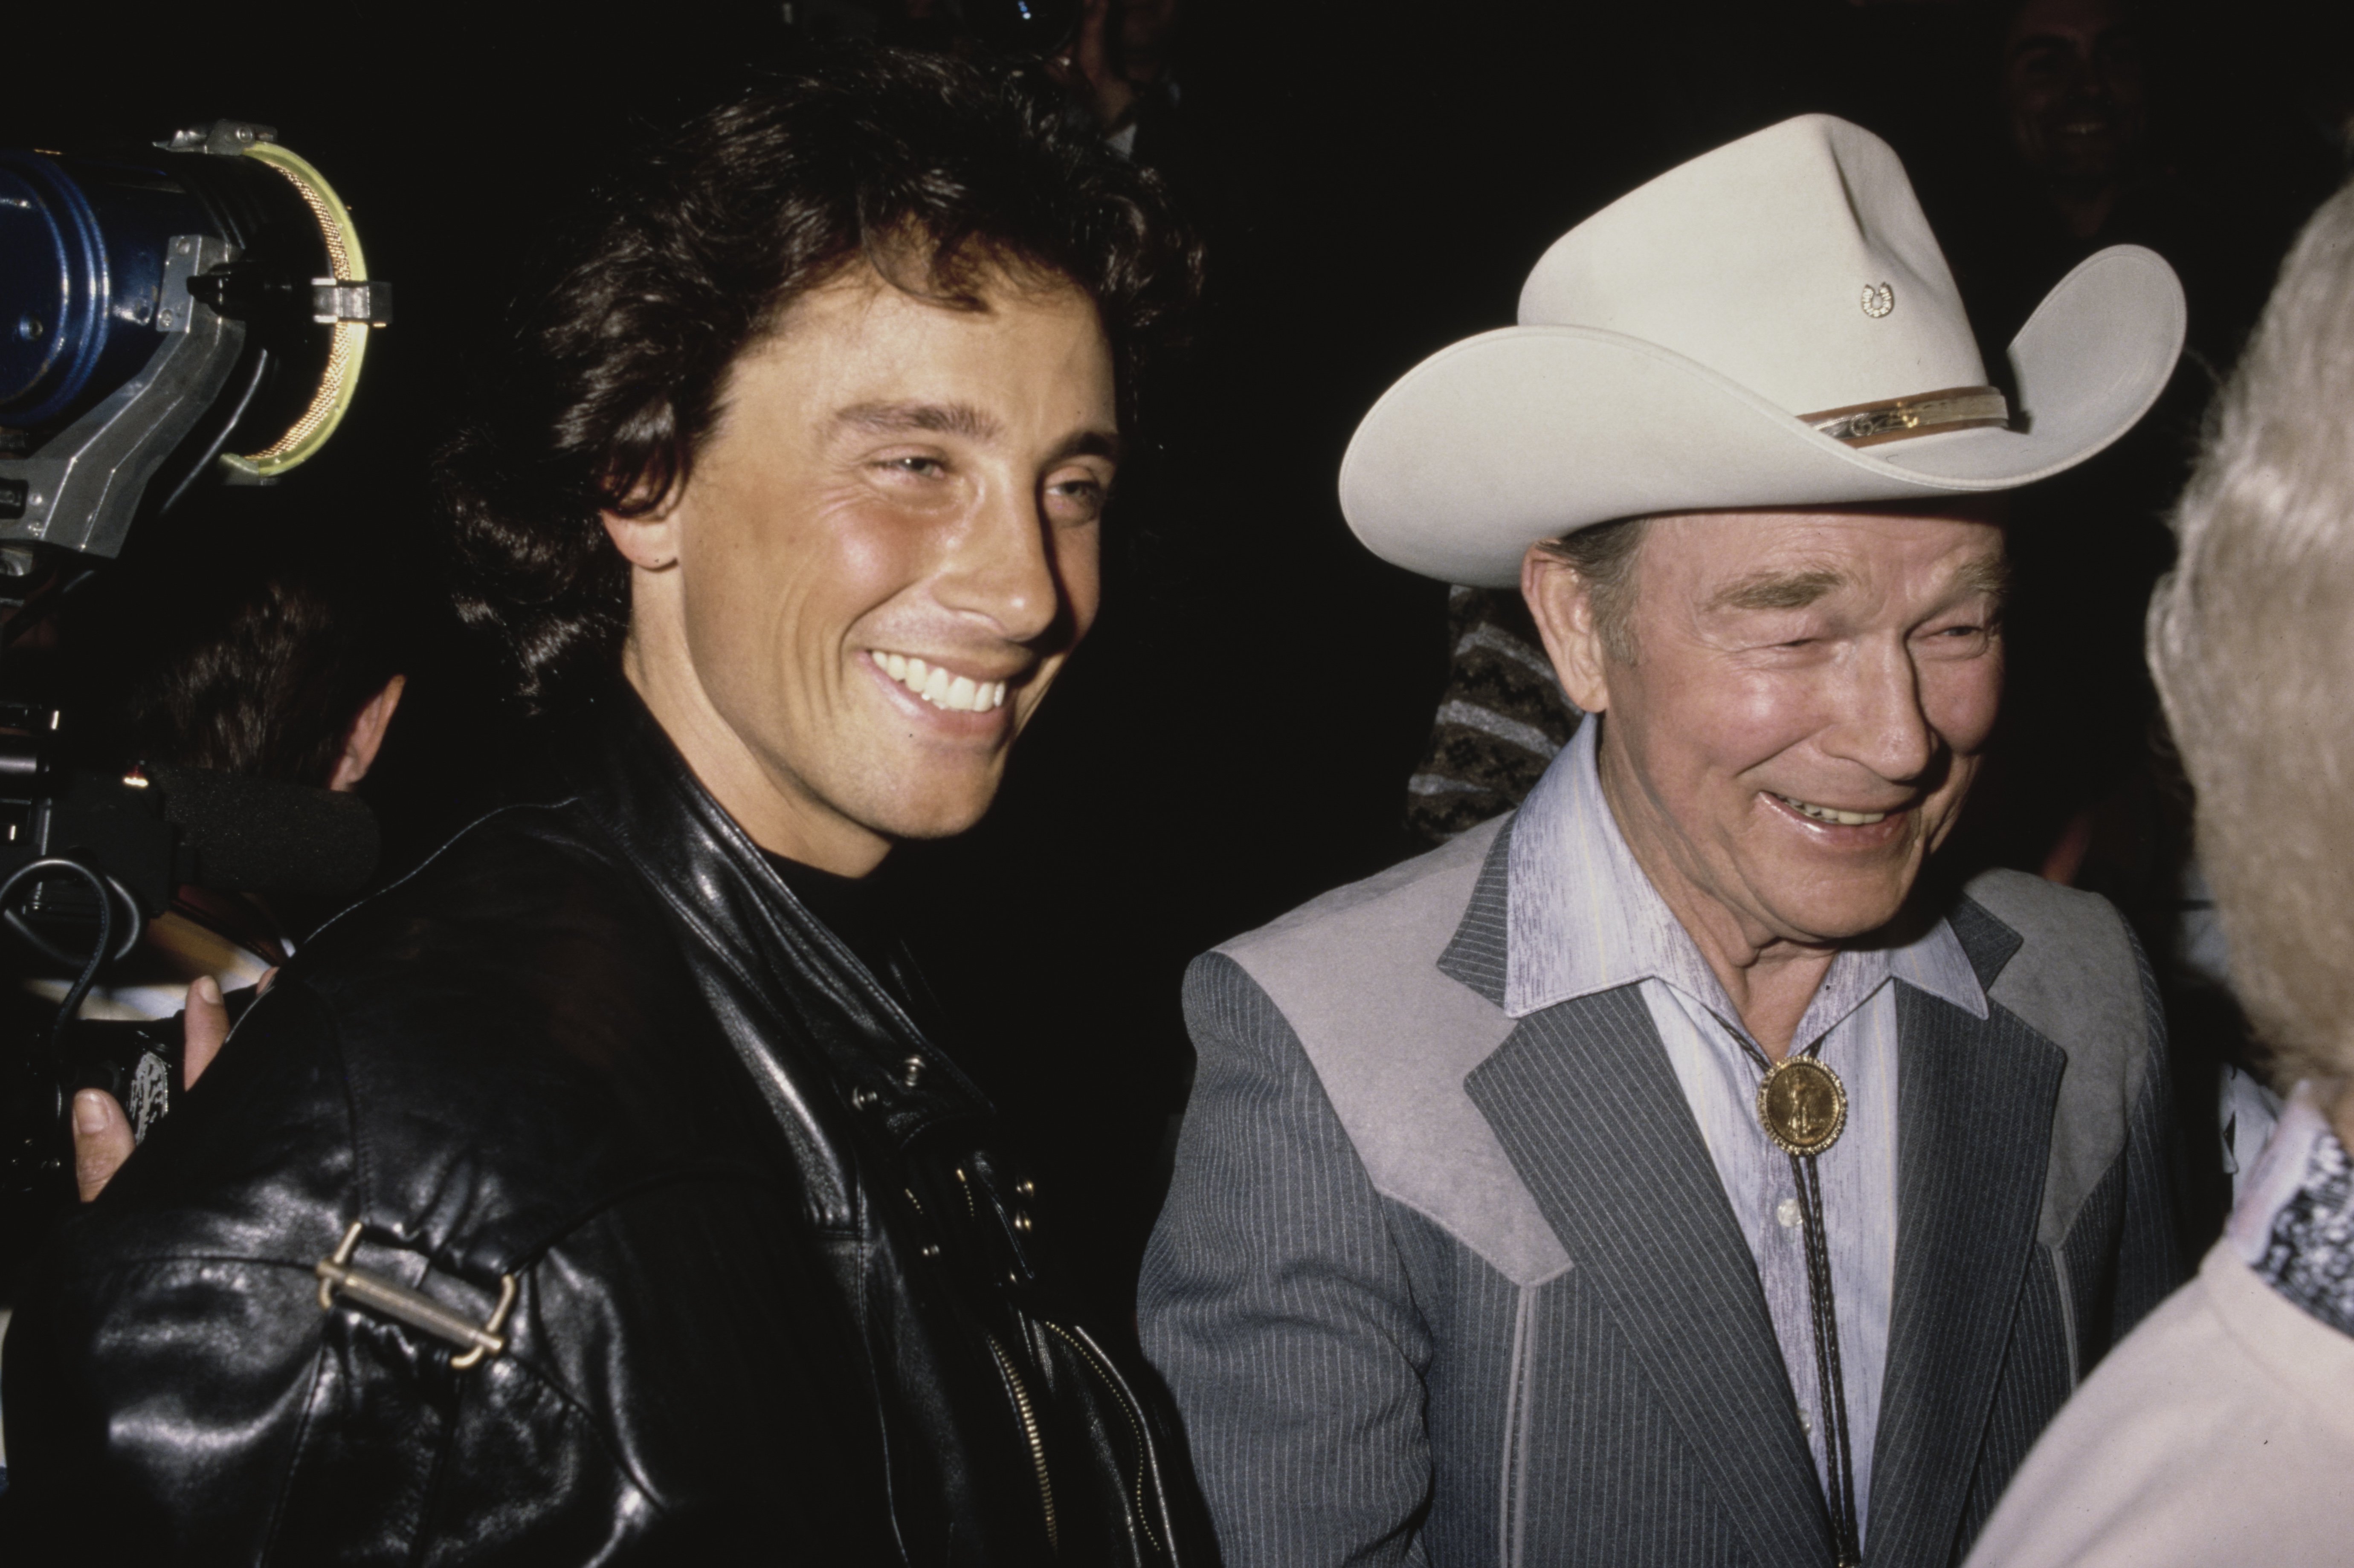 Roy Rogers (1911 - 1998) with Matt Lattanzi in 1992 | Source: Getty Images